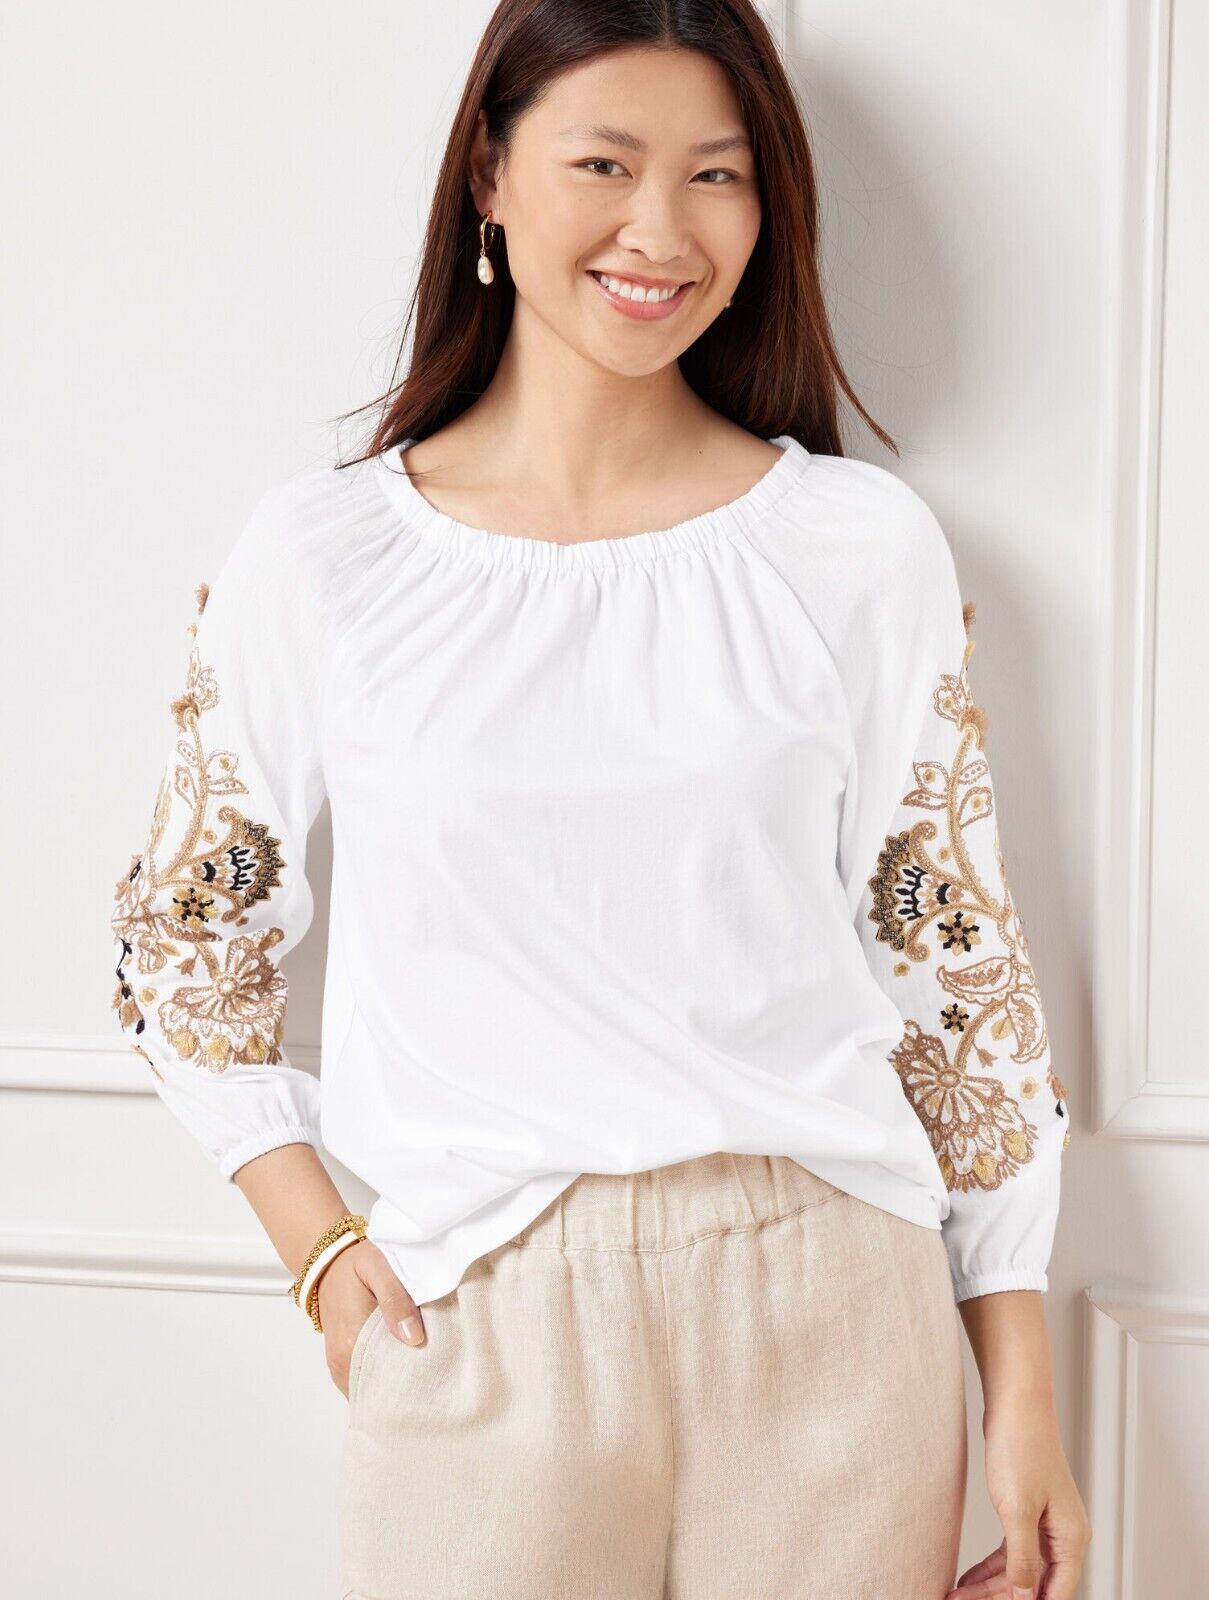 EMBROIDERED BLOUSON SLEEVE TOP at Talbots, NWT $79.50